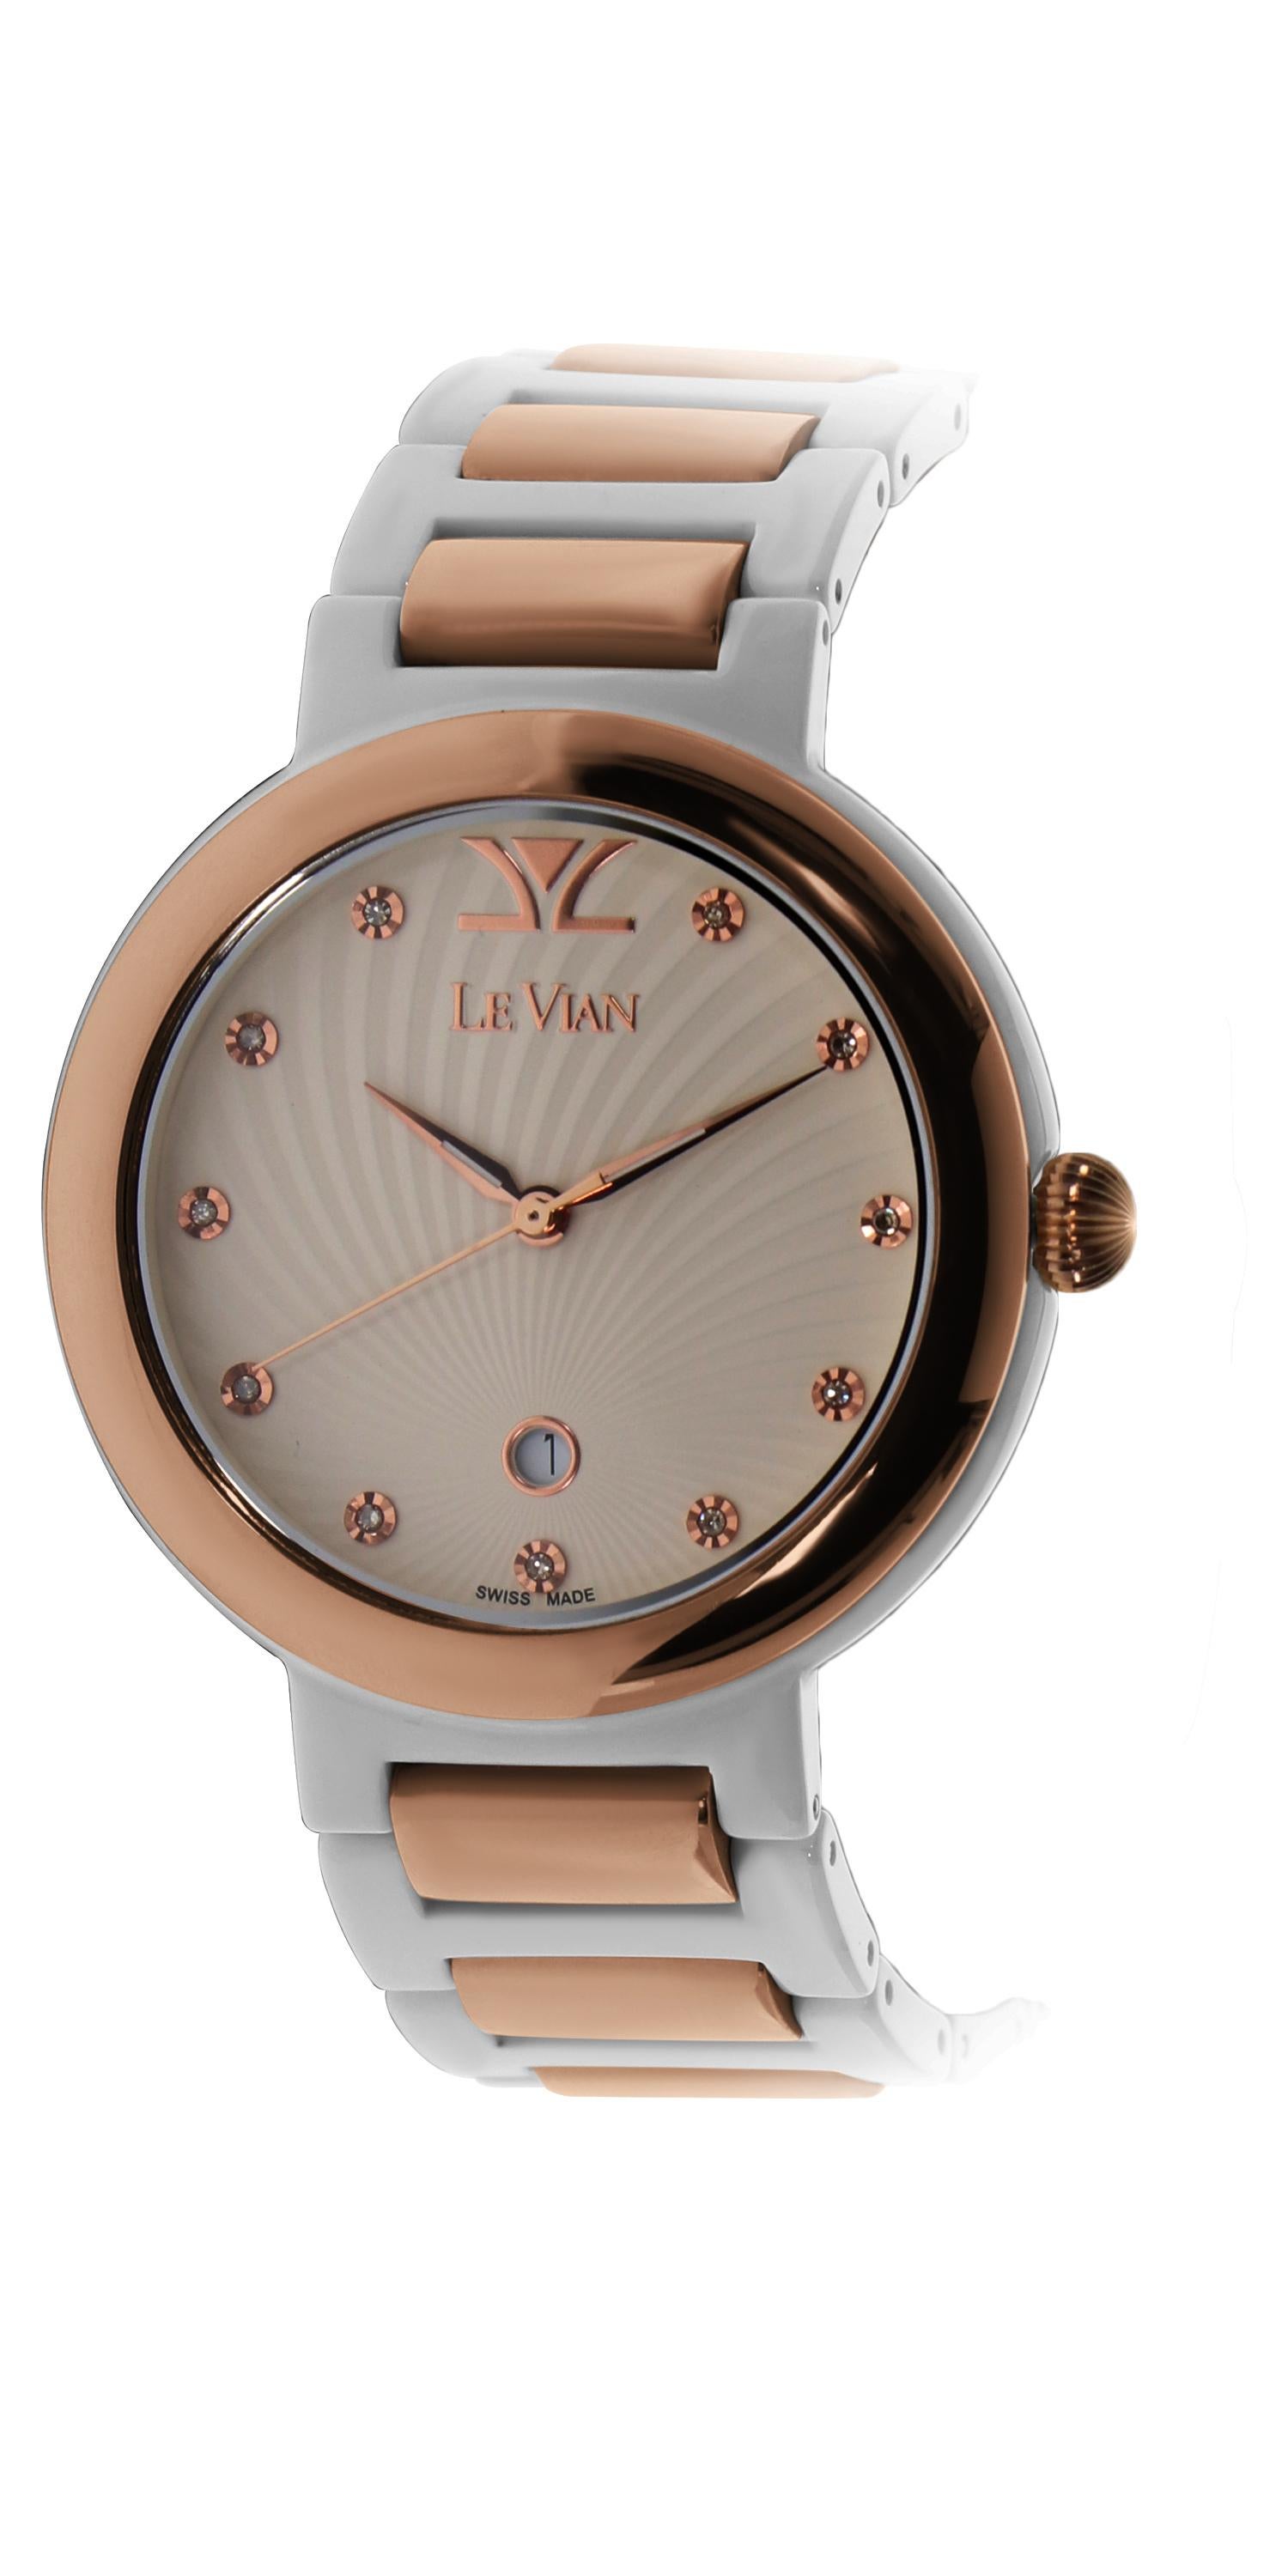 Le Vian 40mm Round Wristwatch with 0.05cts of Chocolate Diamonds in Strawberry Gold Stainless Steel and Vanilla Ceramic.
